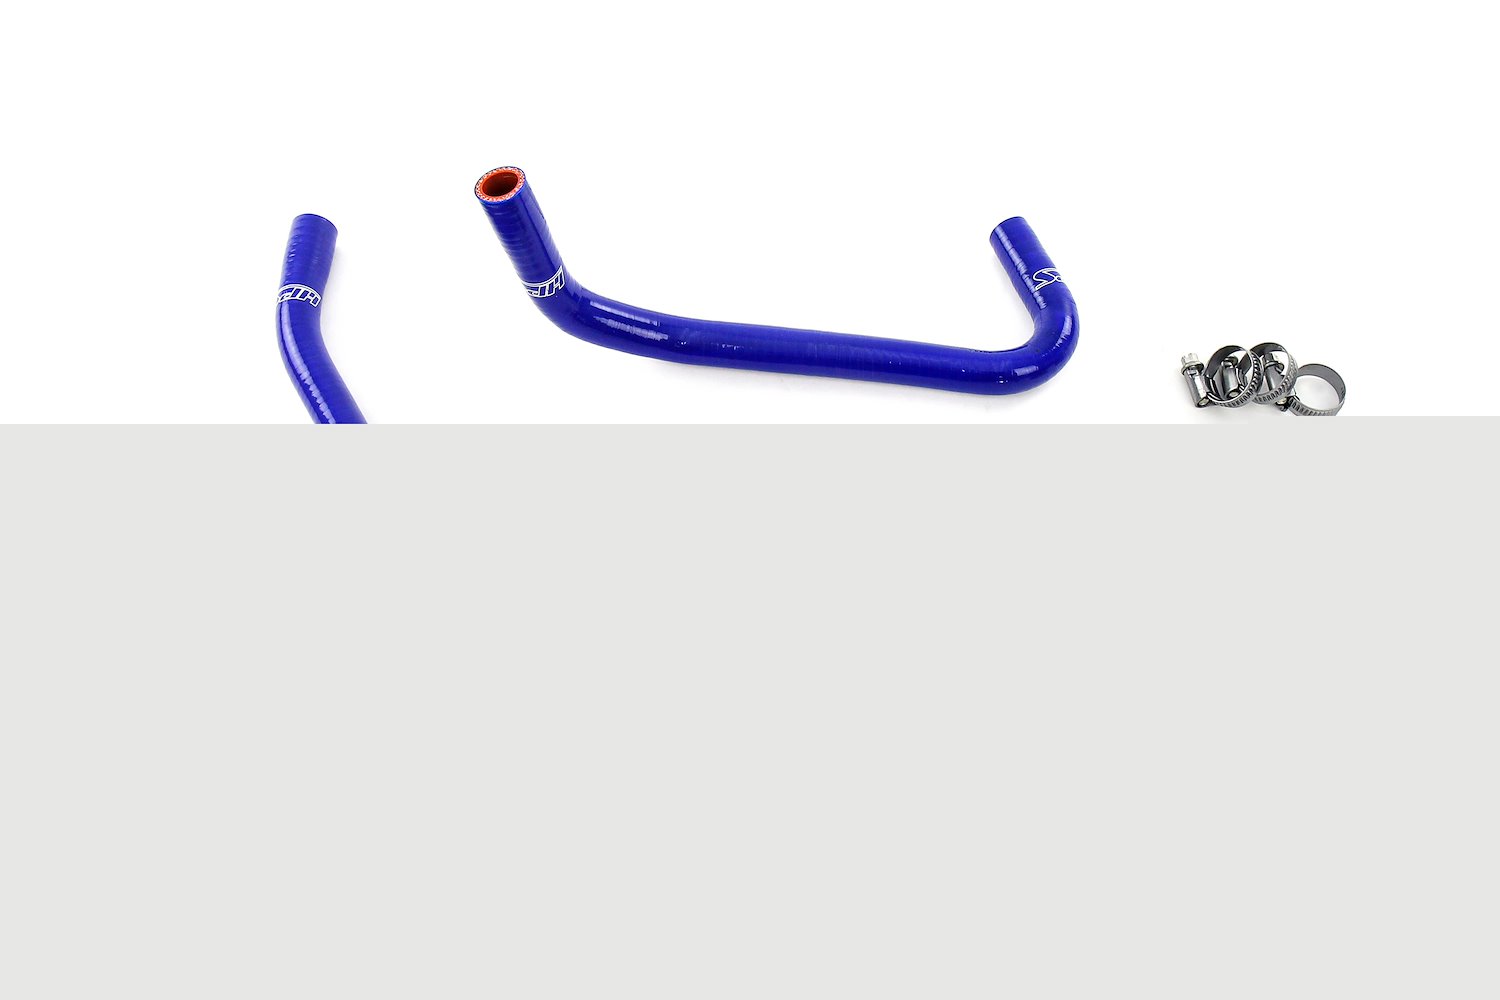 57-2141H-BLUE Heater Hose Kit, 3-Ply Reinforced Silicone, Replaces Rubber Heater Coolant Hoses